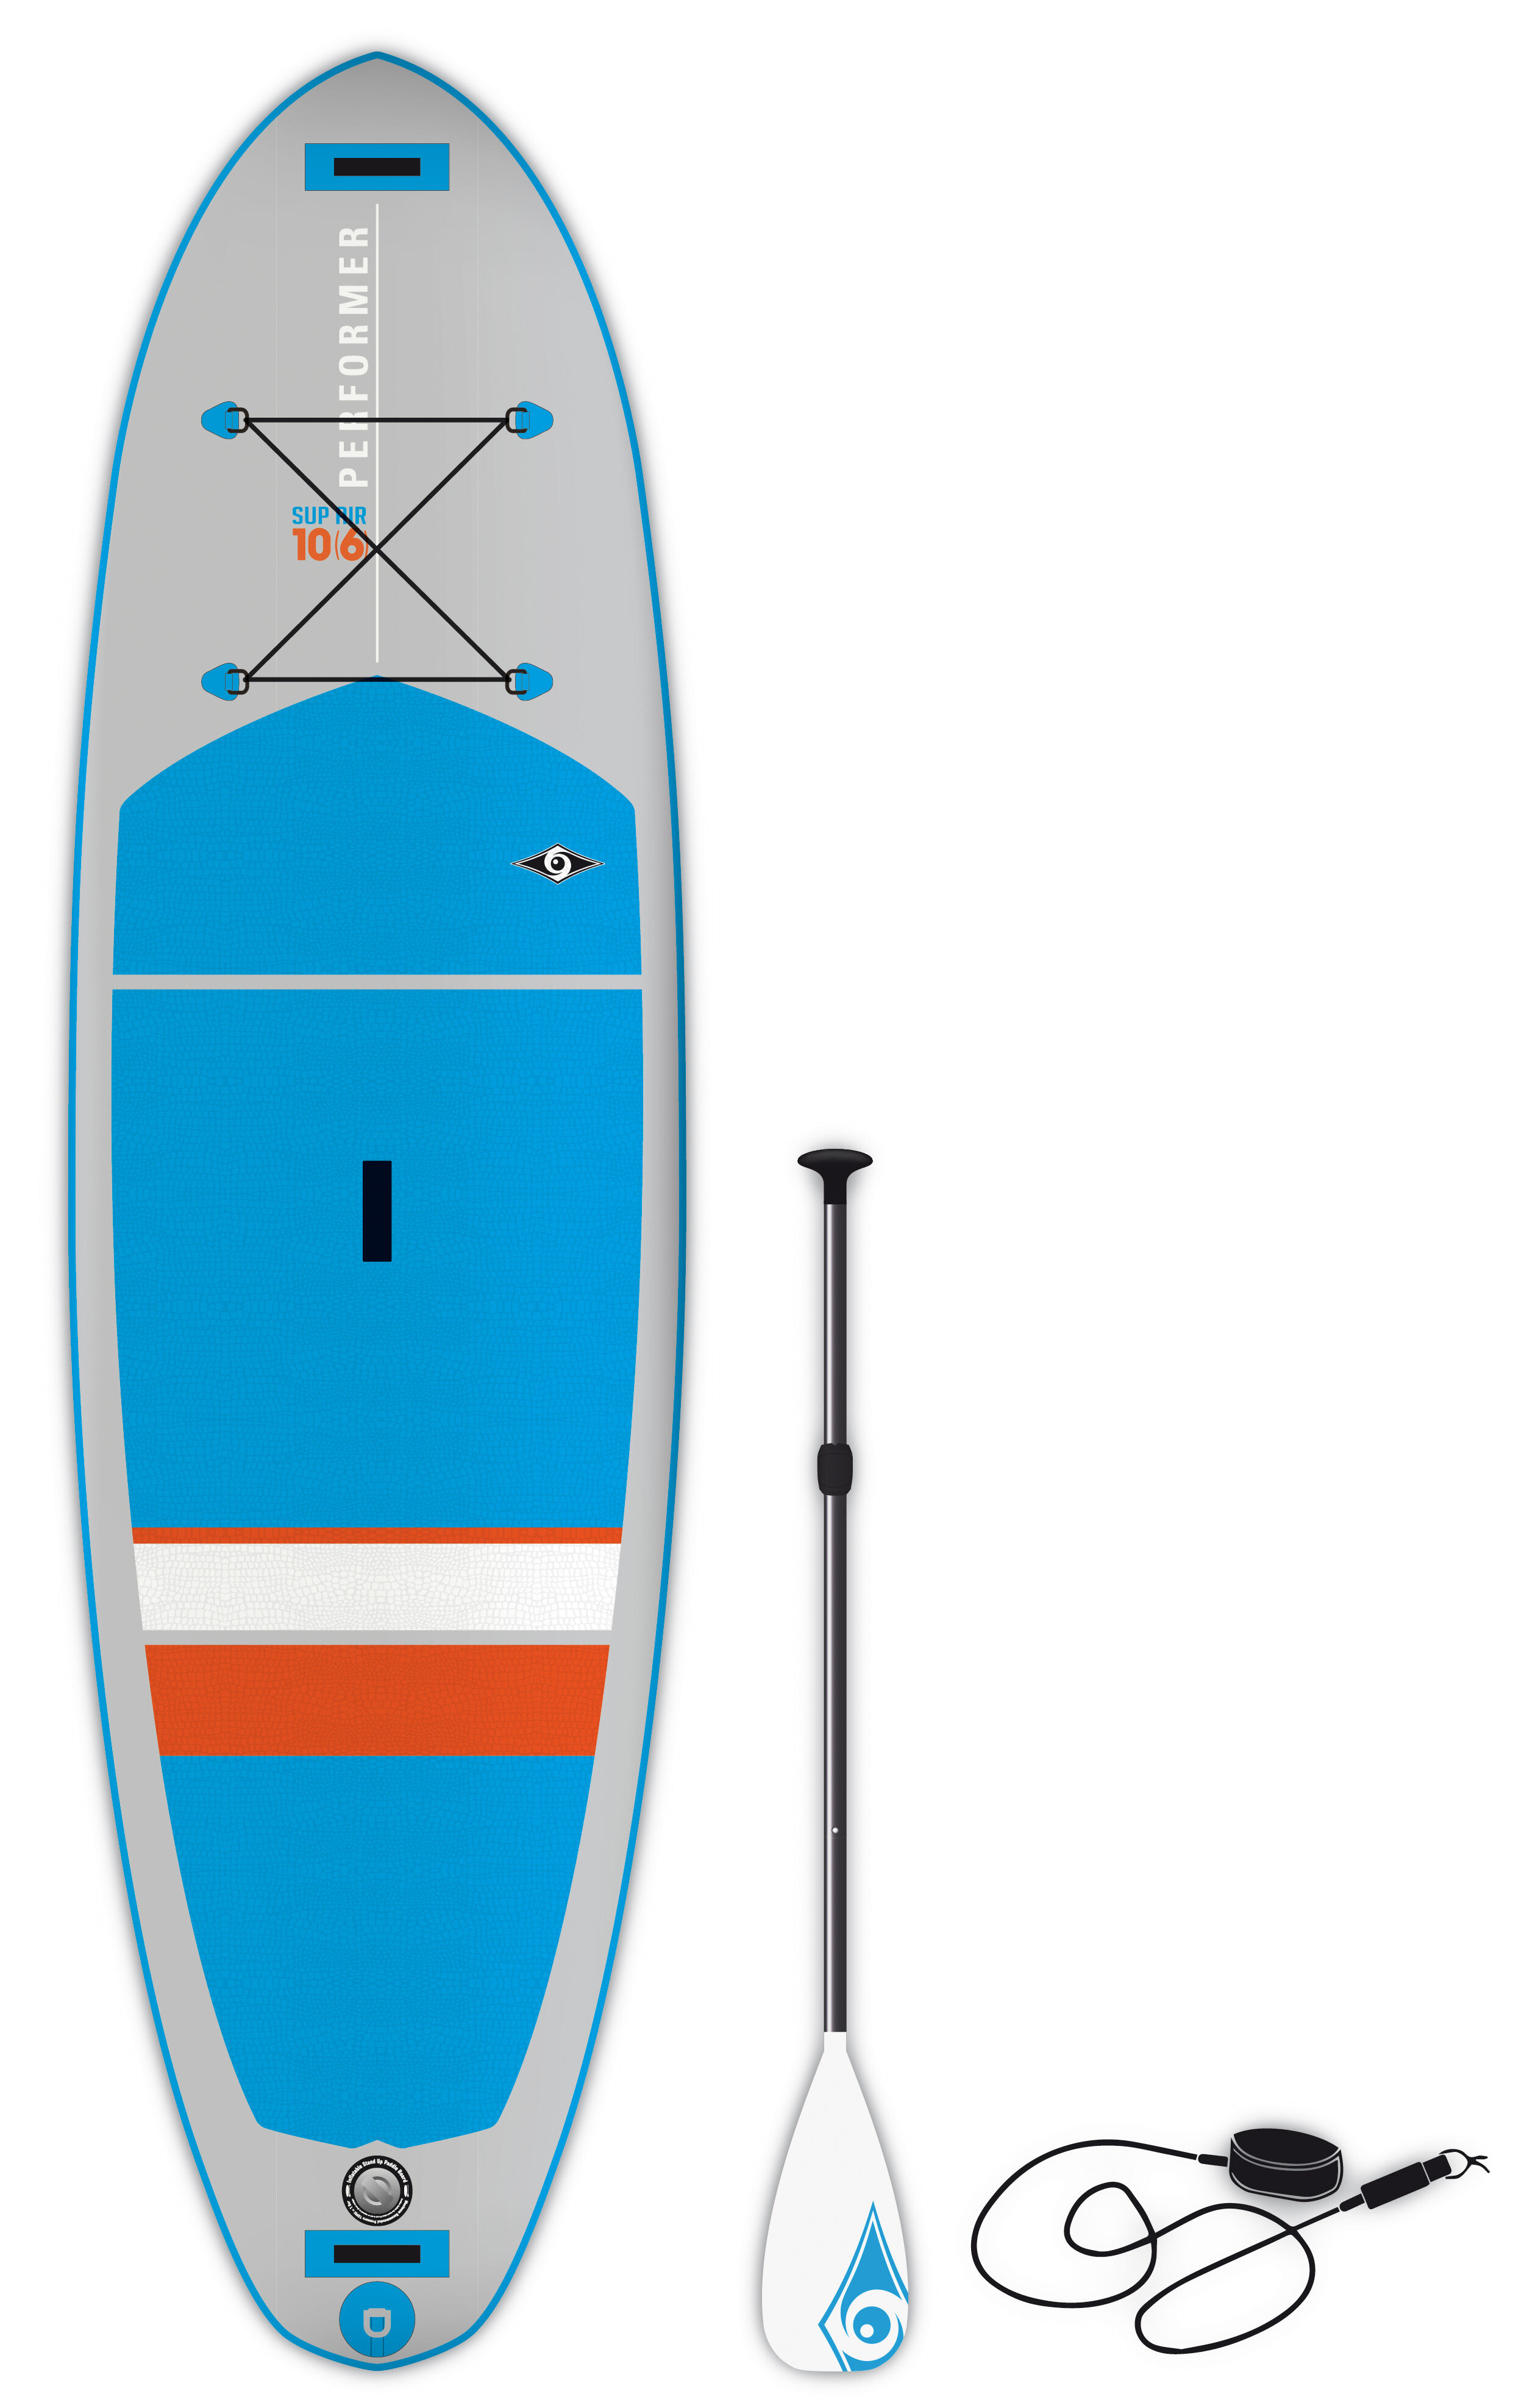 Tahe Outdoor - 10'6" Performer Air Evo - Inflatable paddle board